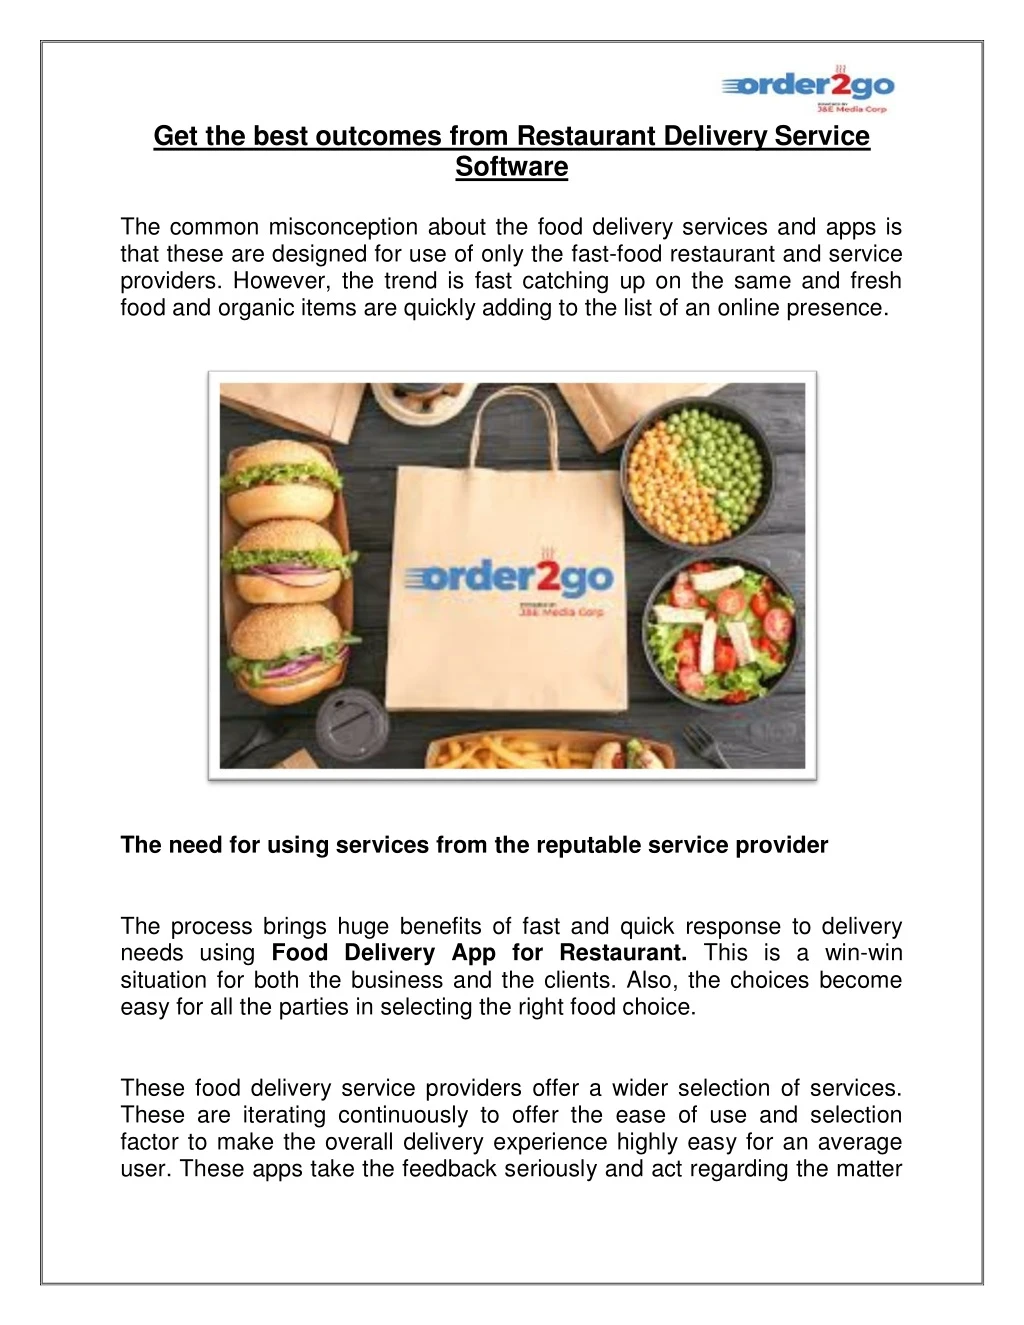 get the best outcomes from restaurant delivery